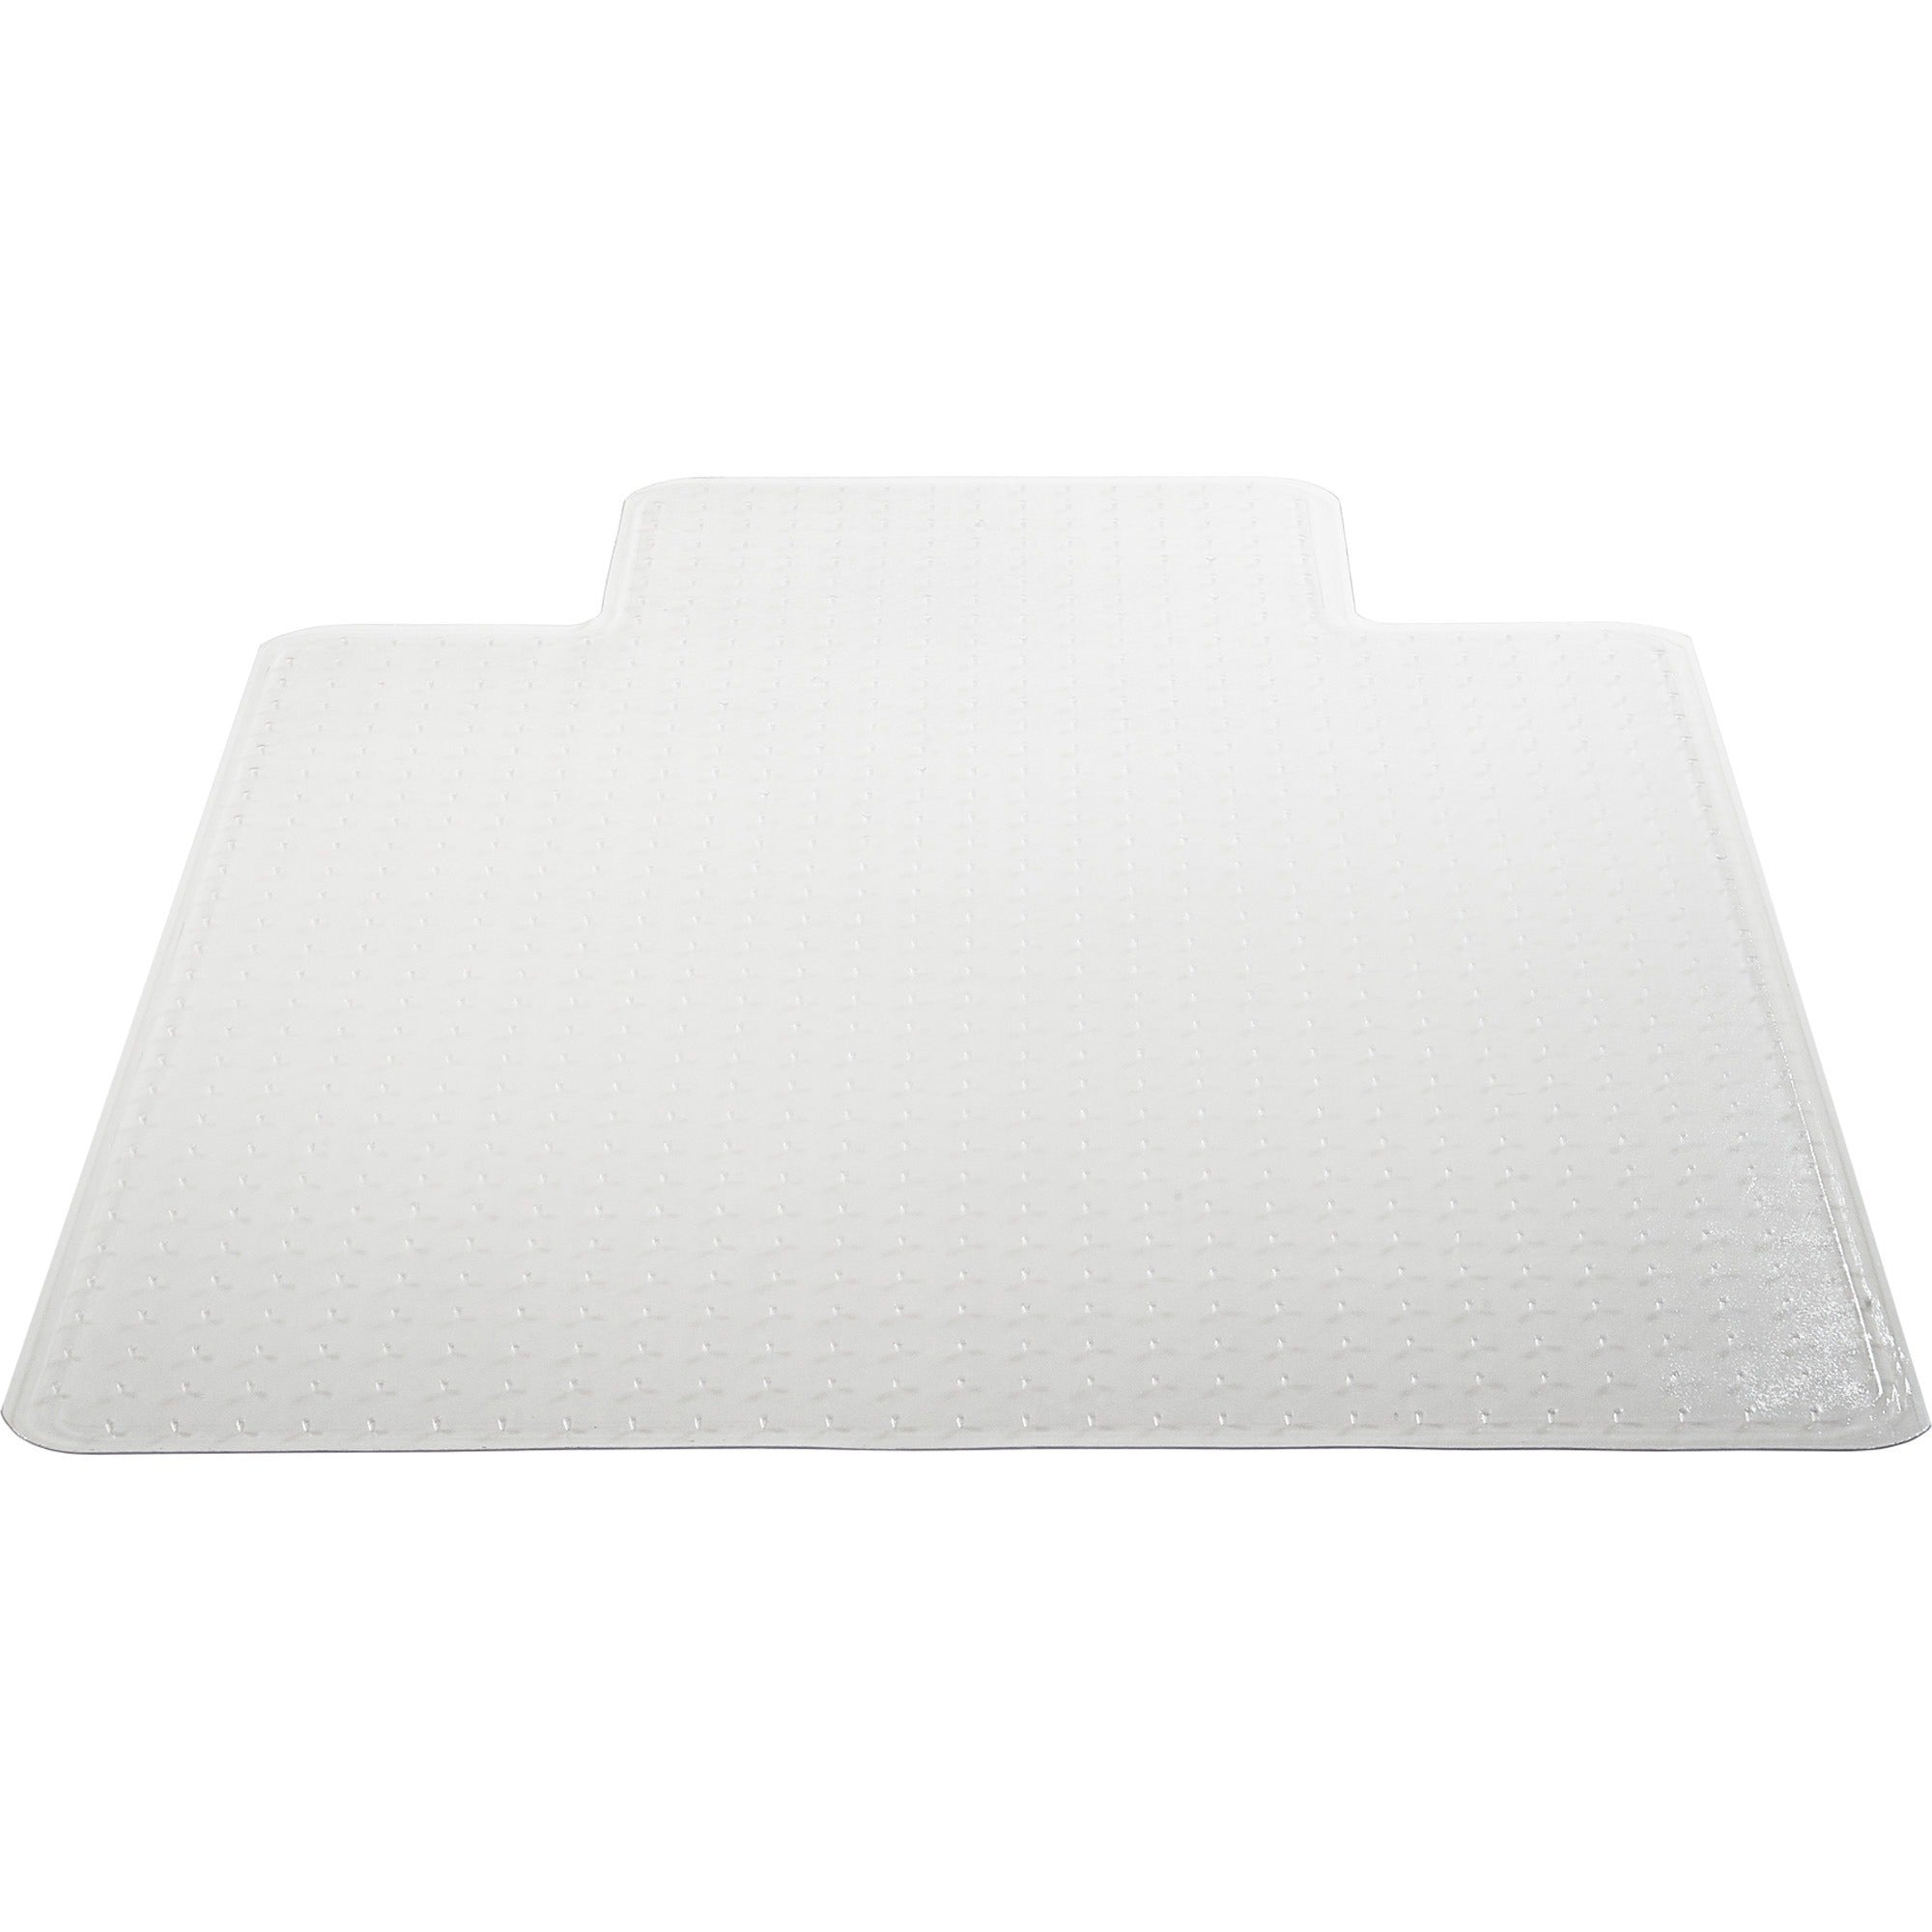 Lorell Wide Lip Low-pile Chairmat - Carpeted Floor - 60" Length x 45" Width x 0.122" Thickness - Lip Size 12" Length x 25" Width - Vinyl - Clear - 1Each - 